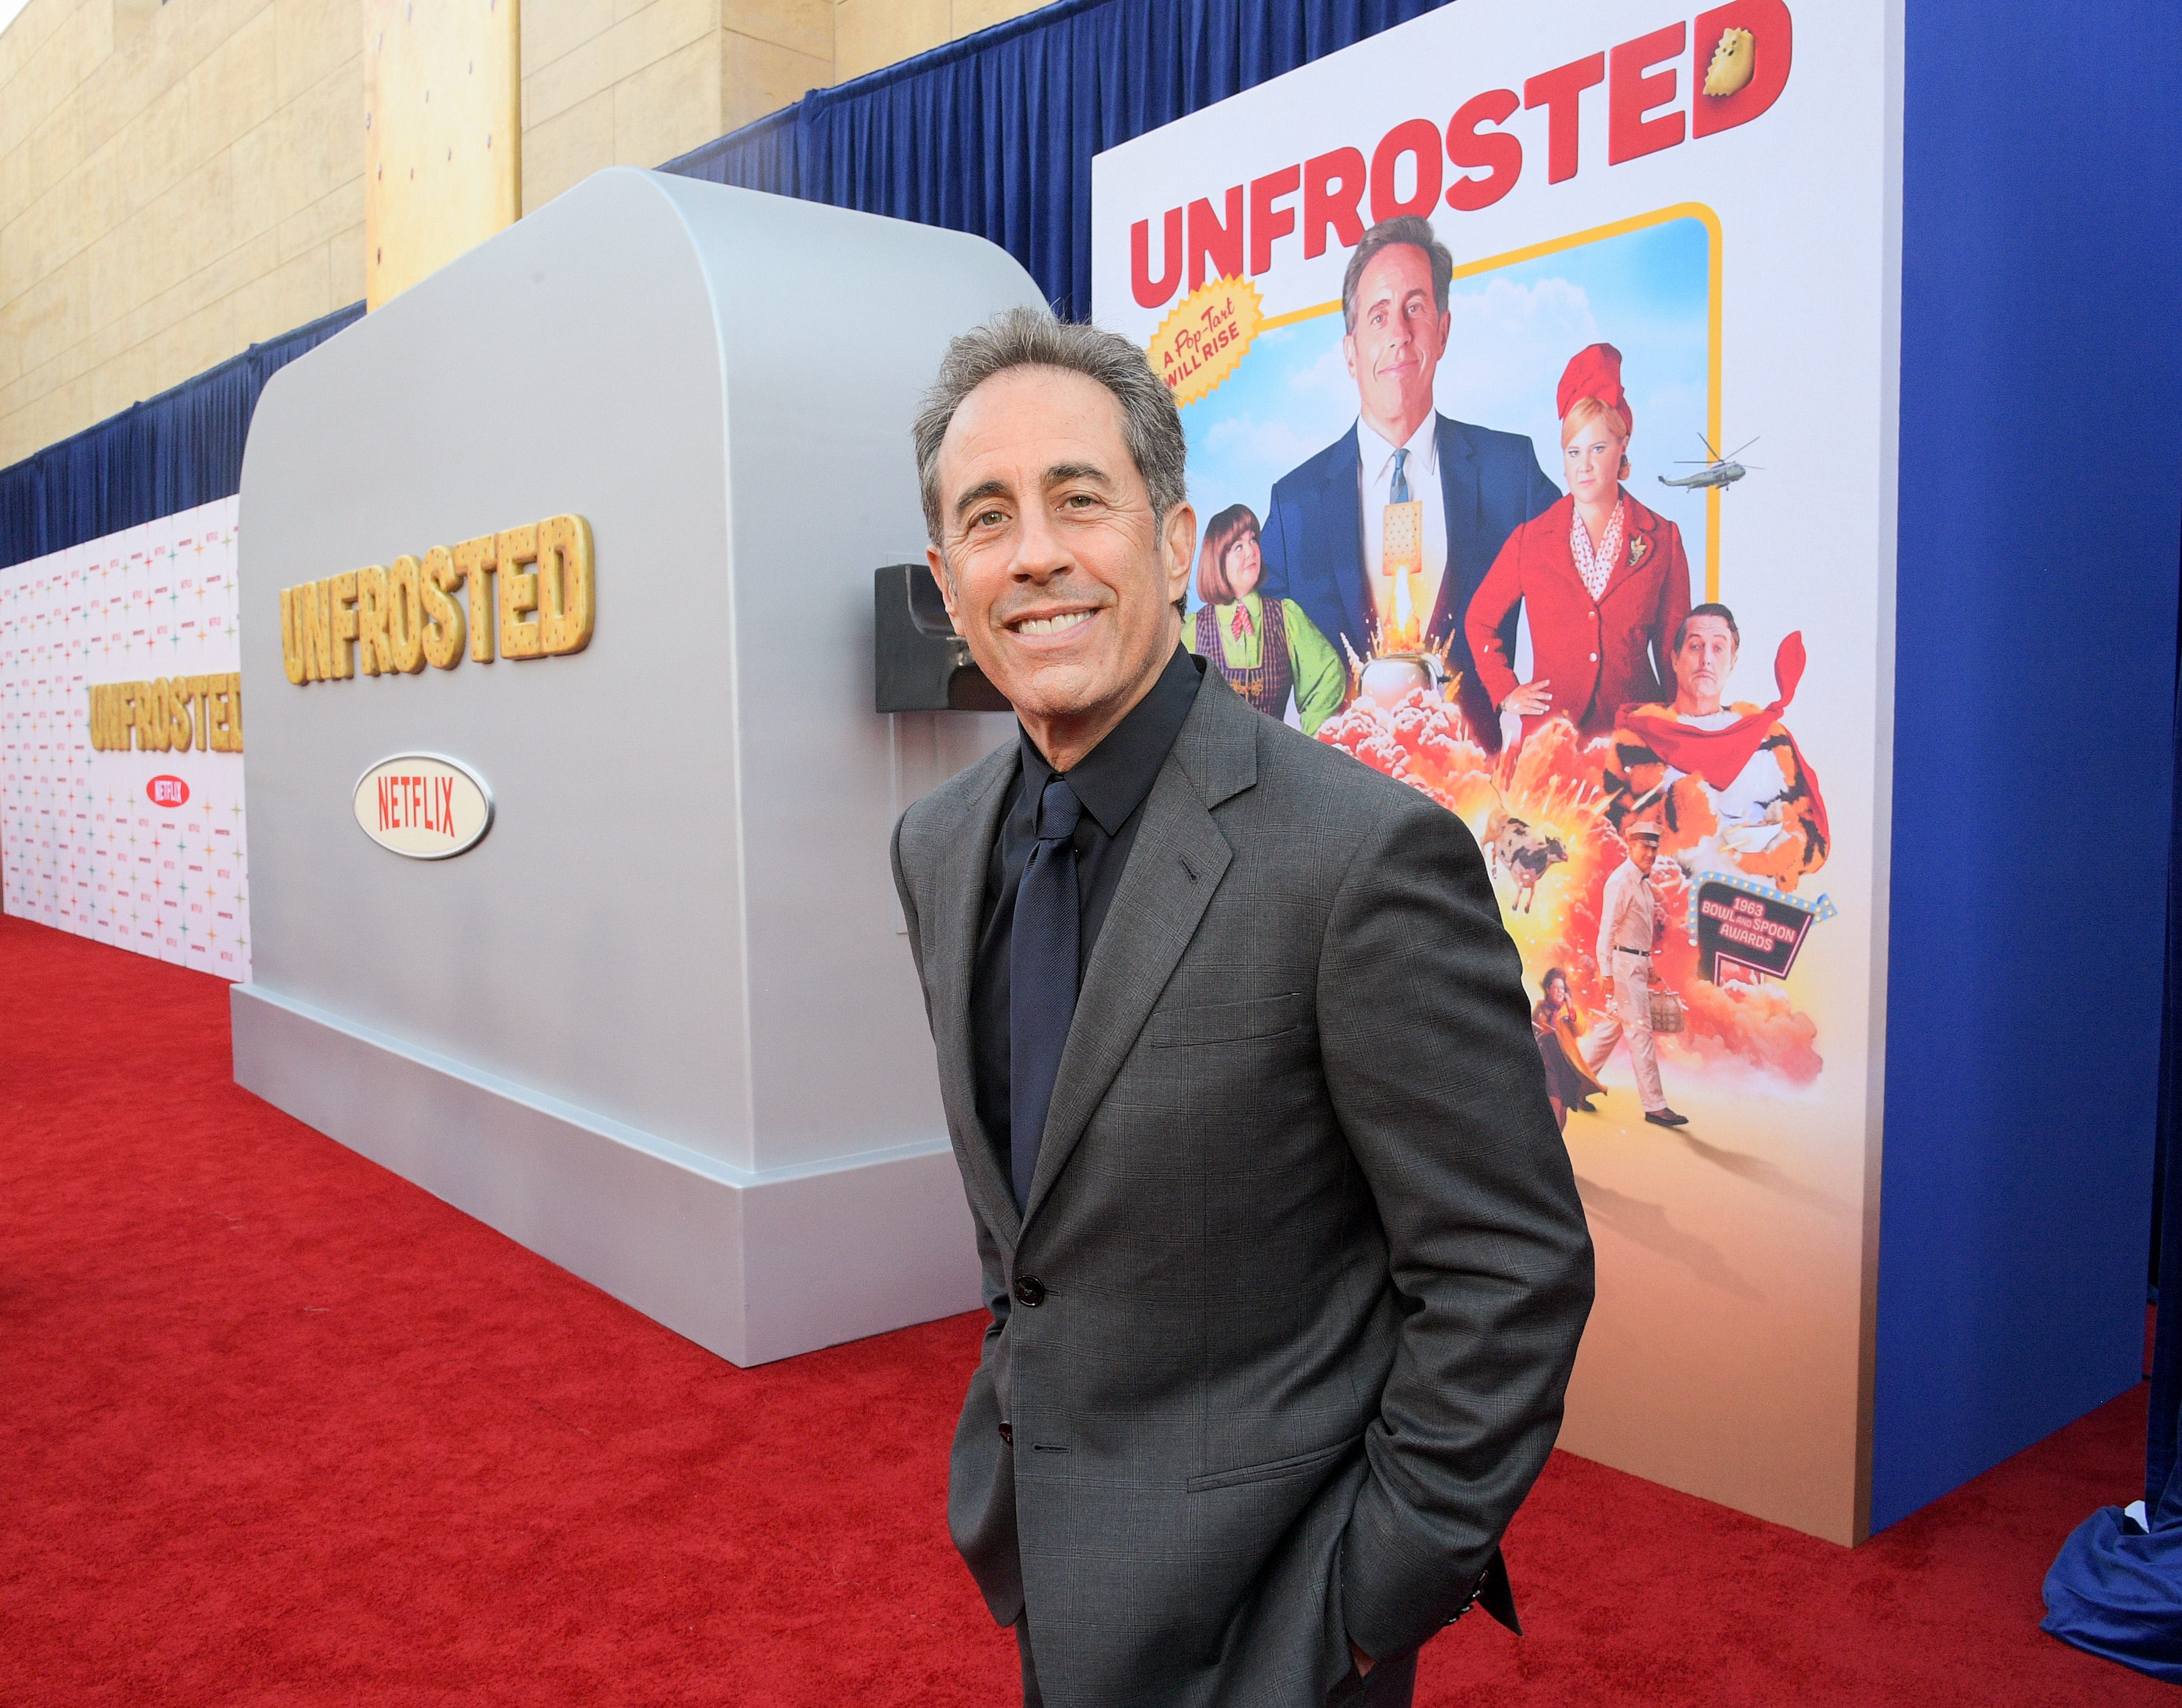 Jerry Seinfeld reflects on criticism from pro-Palestinian protesters: 'It's so dumb'